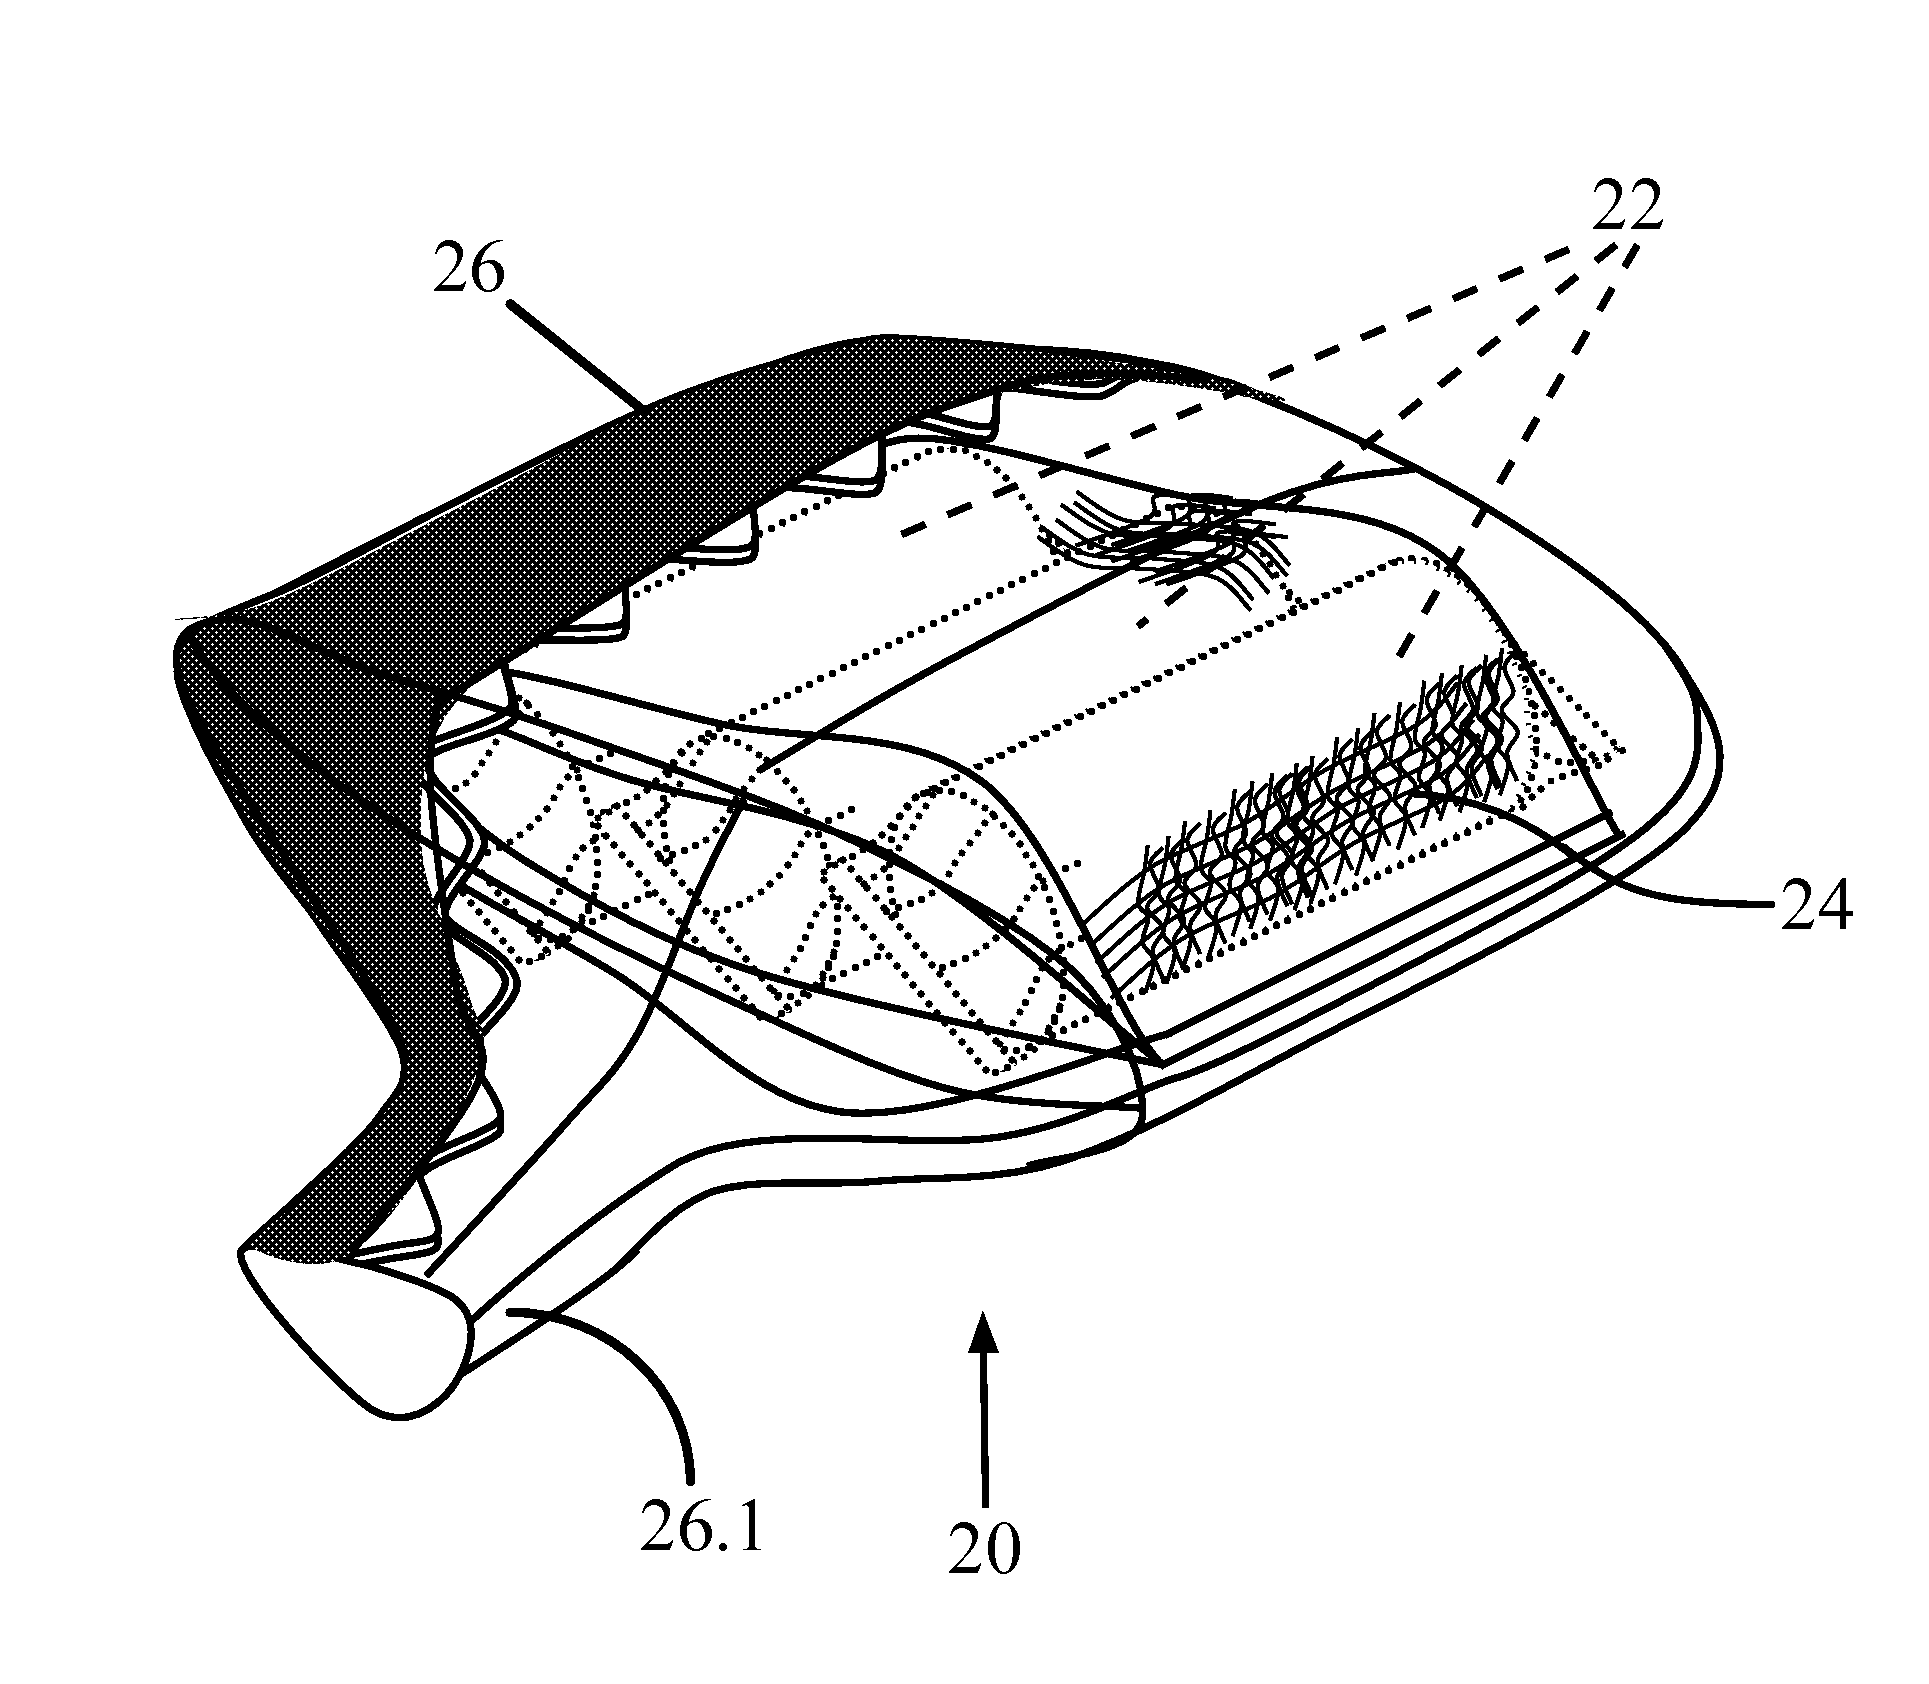 Juice Containing Pouch and Press for Extracting Juice from the Pouch